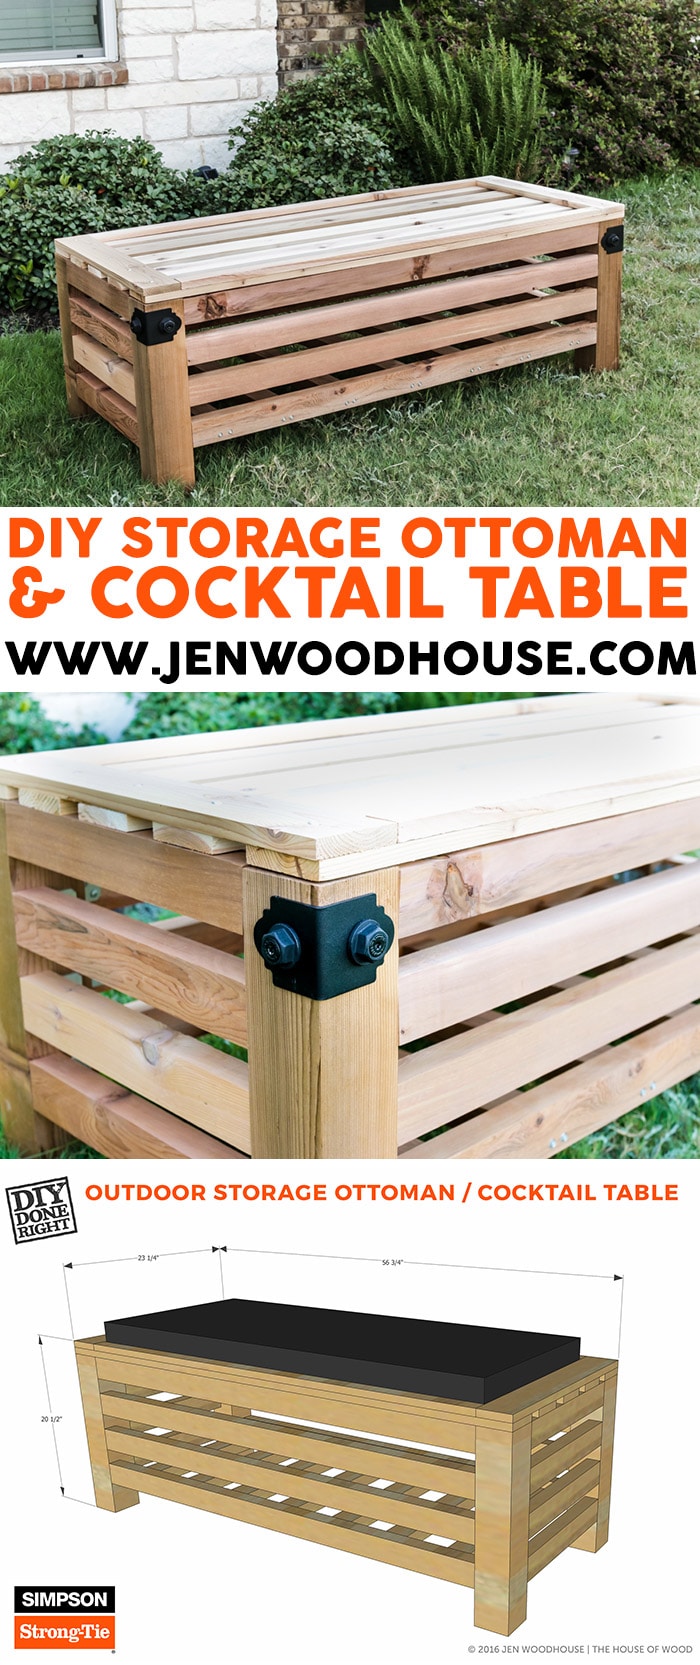 How to build a DIY outdoor storage ottoman and cocktail table - free building plans by Jen Woodhouse!